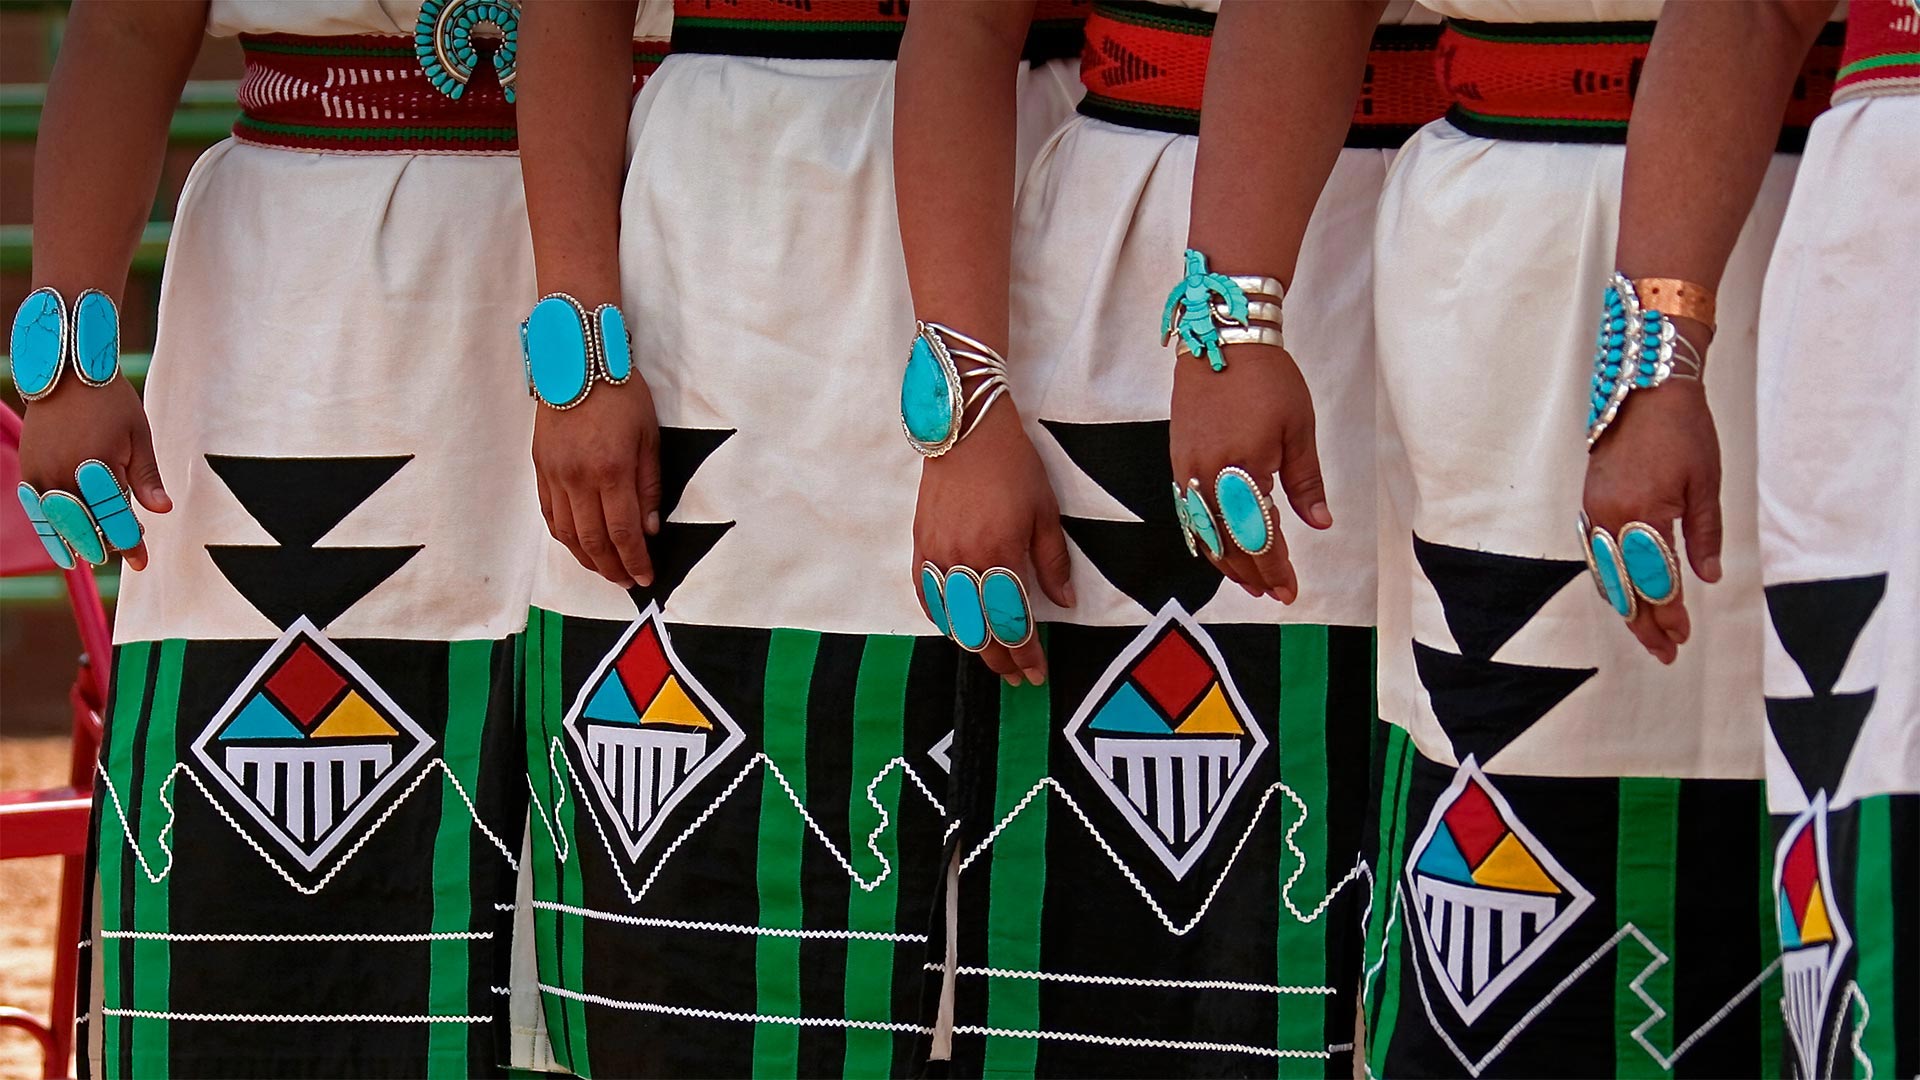 Zuni Olla Maidens at the annual Inter-Tribal Ceremonial in Gallup, New Mexico - Julien McRoberts/Danita Delimont)